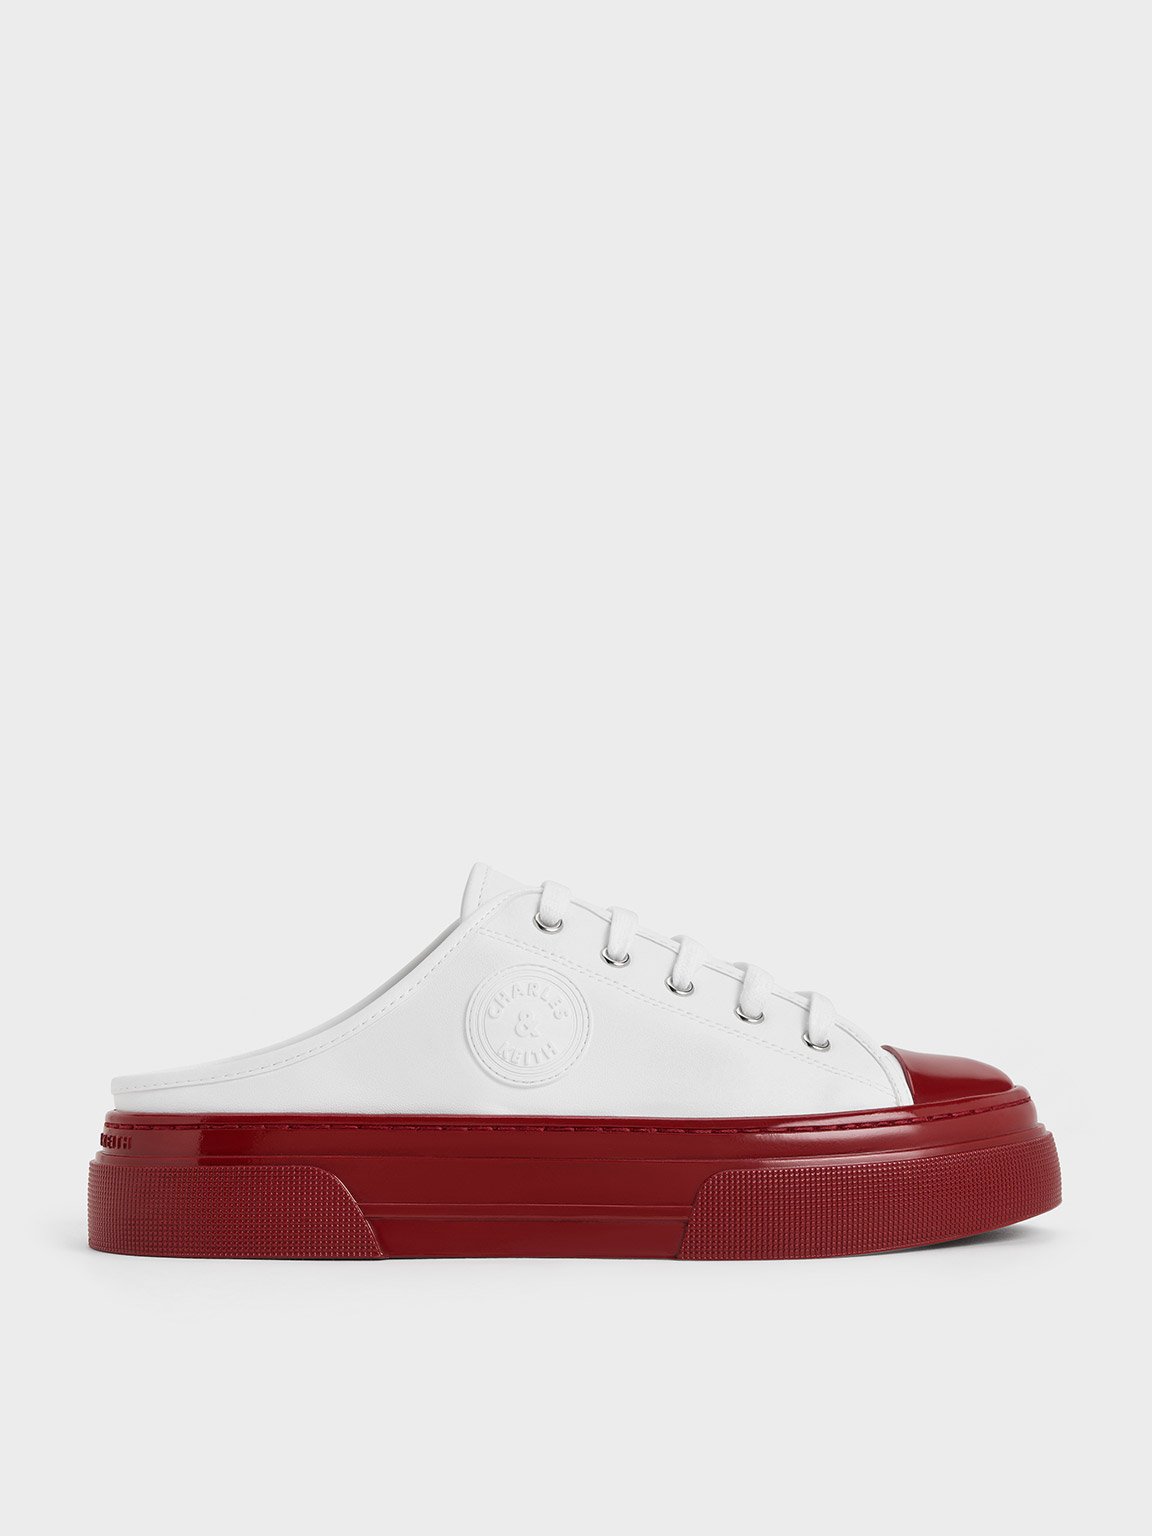 Charles & Keith Kay Two-tone Slip-on Sneakers In Red